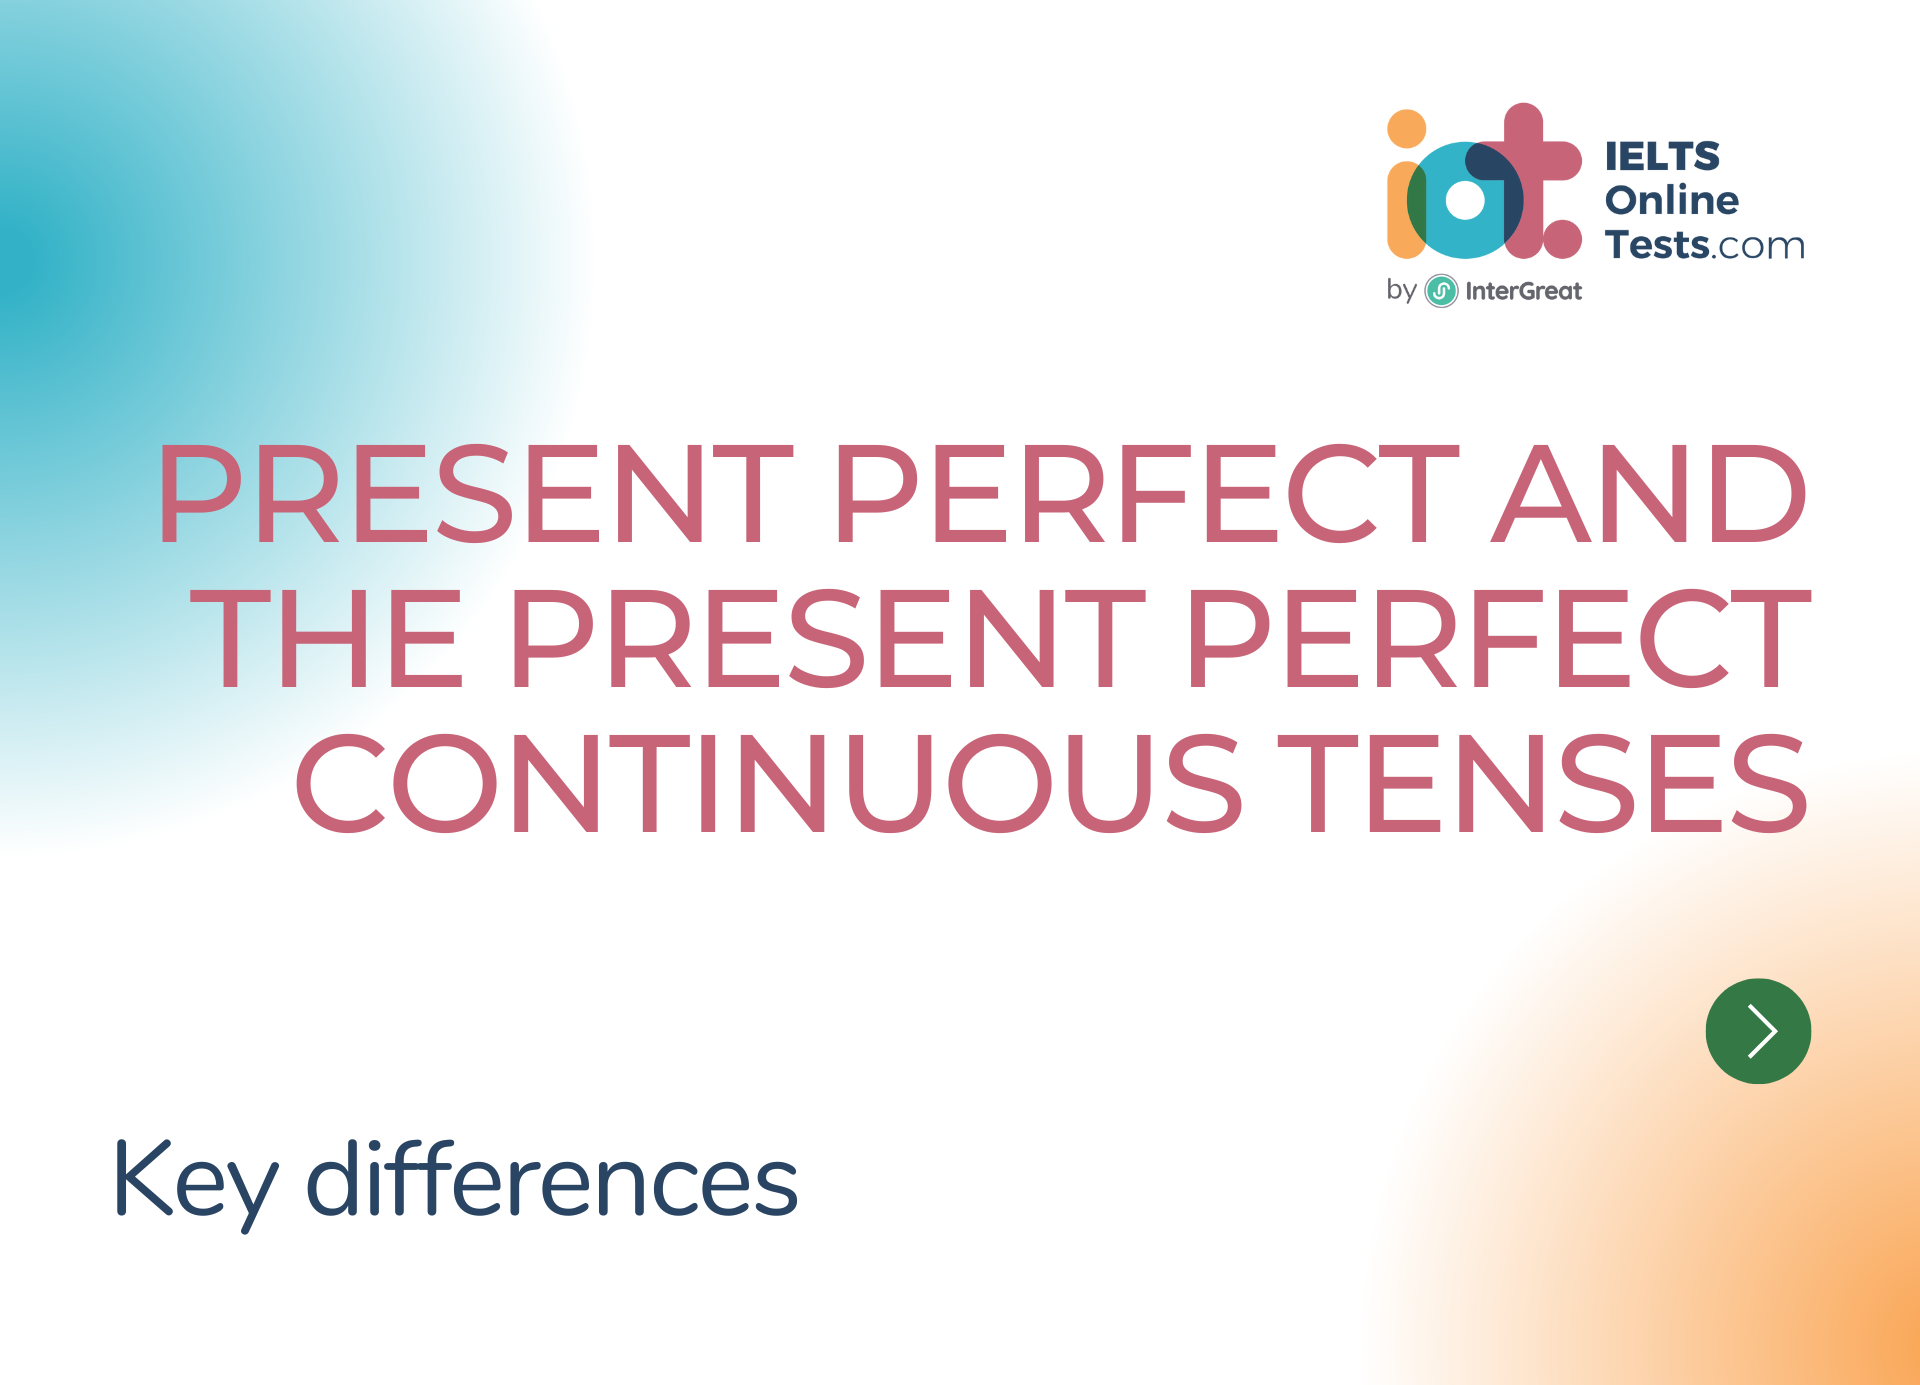 Key differences between the Present Perfect and the Present Perfect Continuous tenses